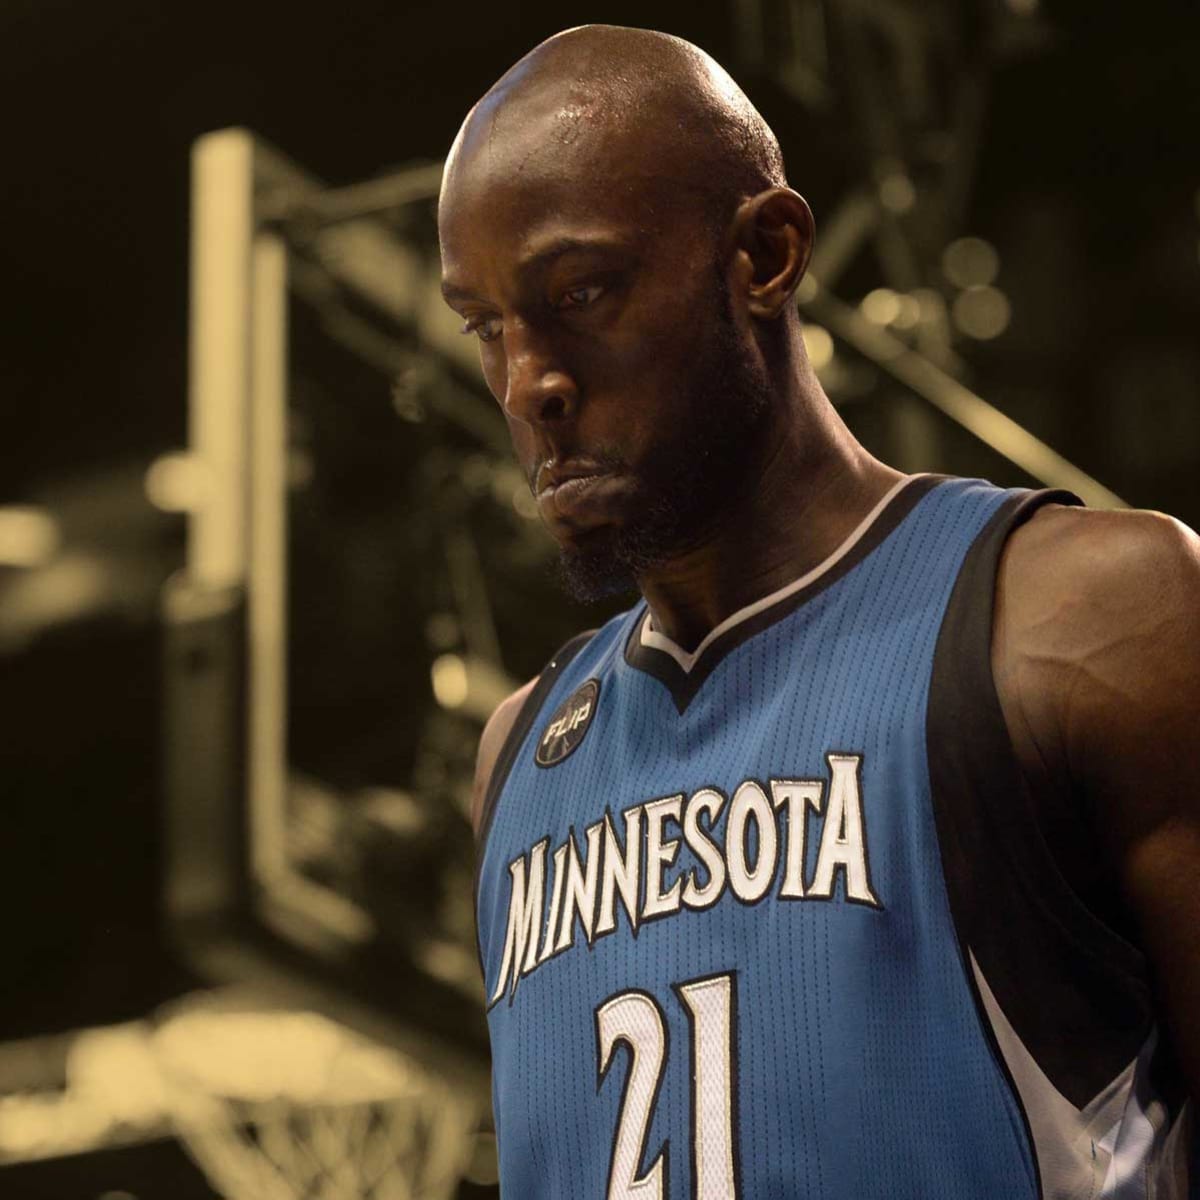 I'm not entertaining it” — Kevin Garnett on having his No. 21 jersey retired  by the Timberwolves - Basketball Network - Your daily dose of basketball